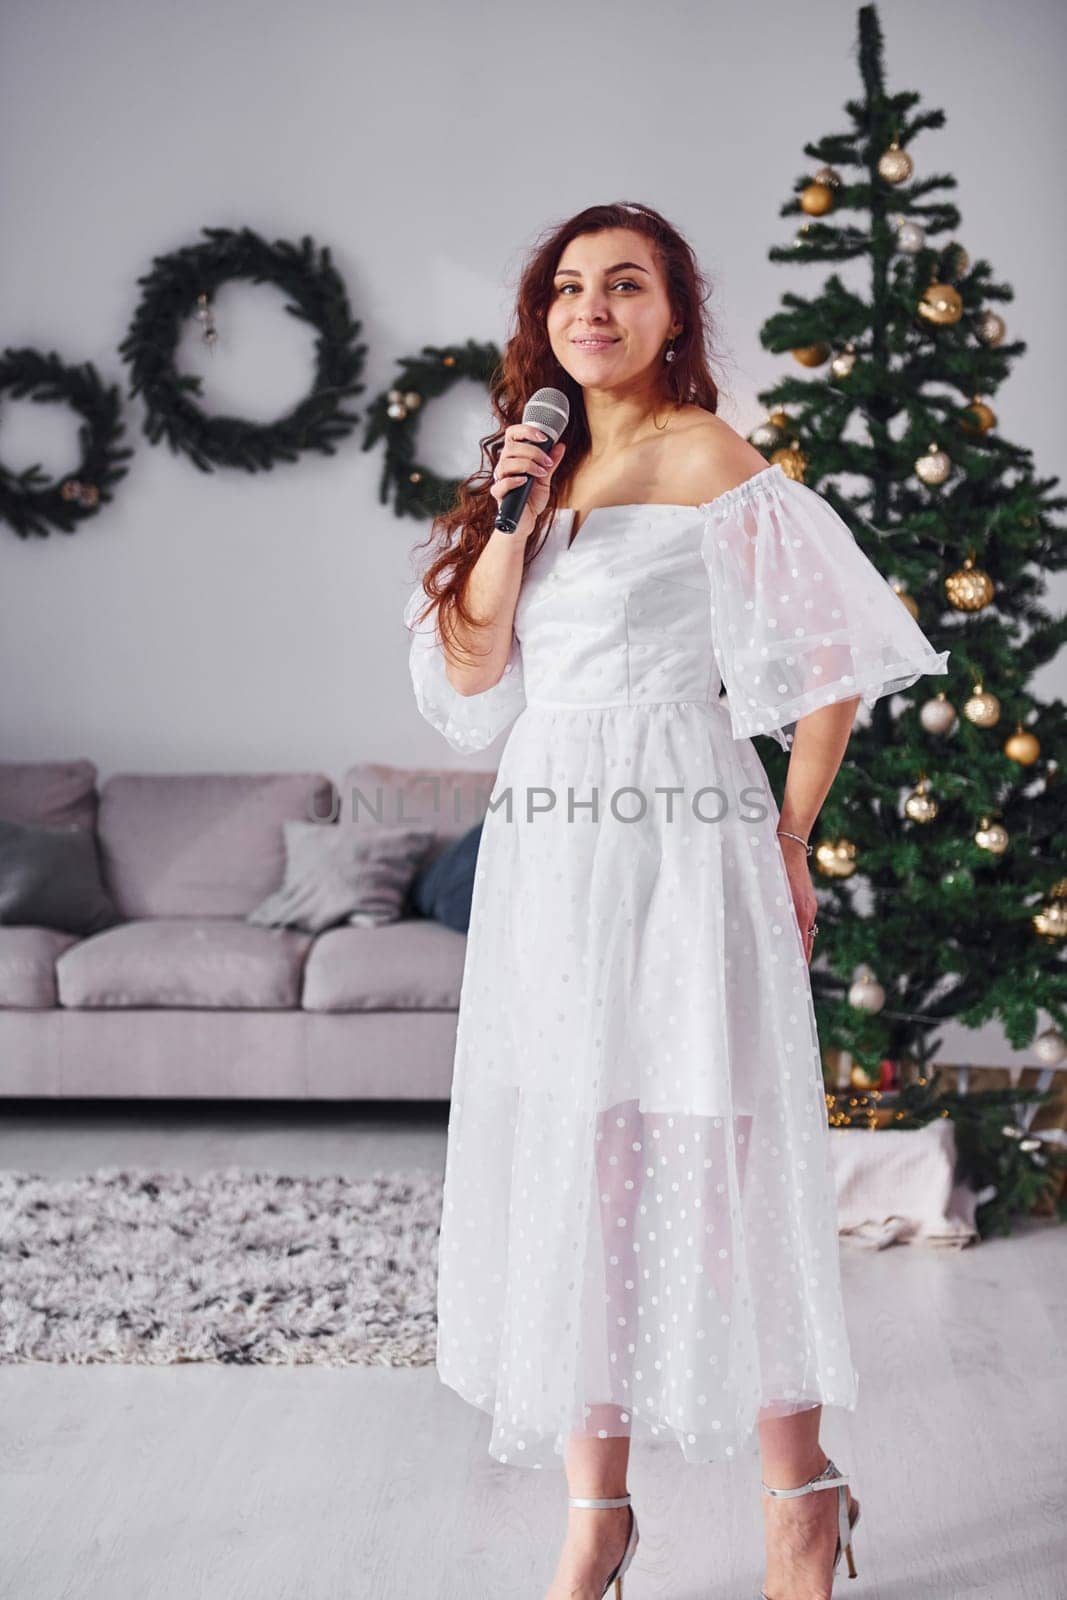 Woman in white dress and with microphone in hands is singing in the christmas decorated domestic room.